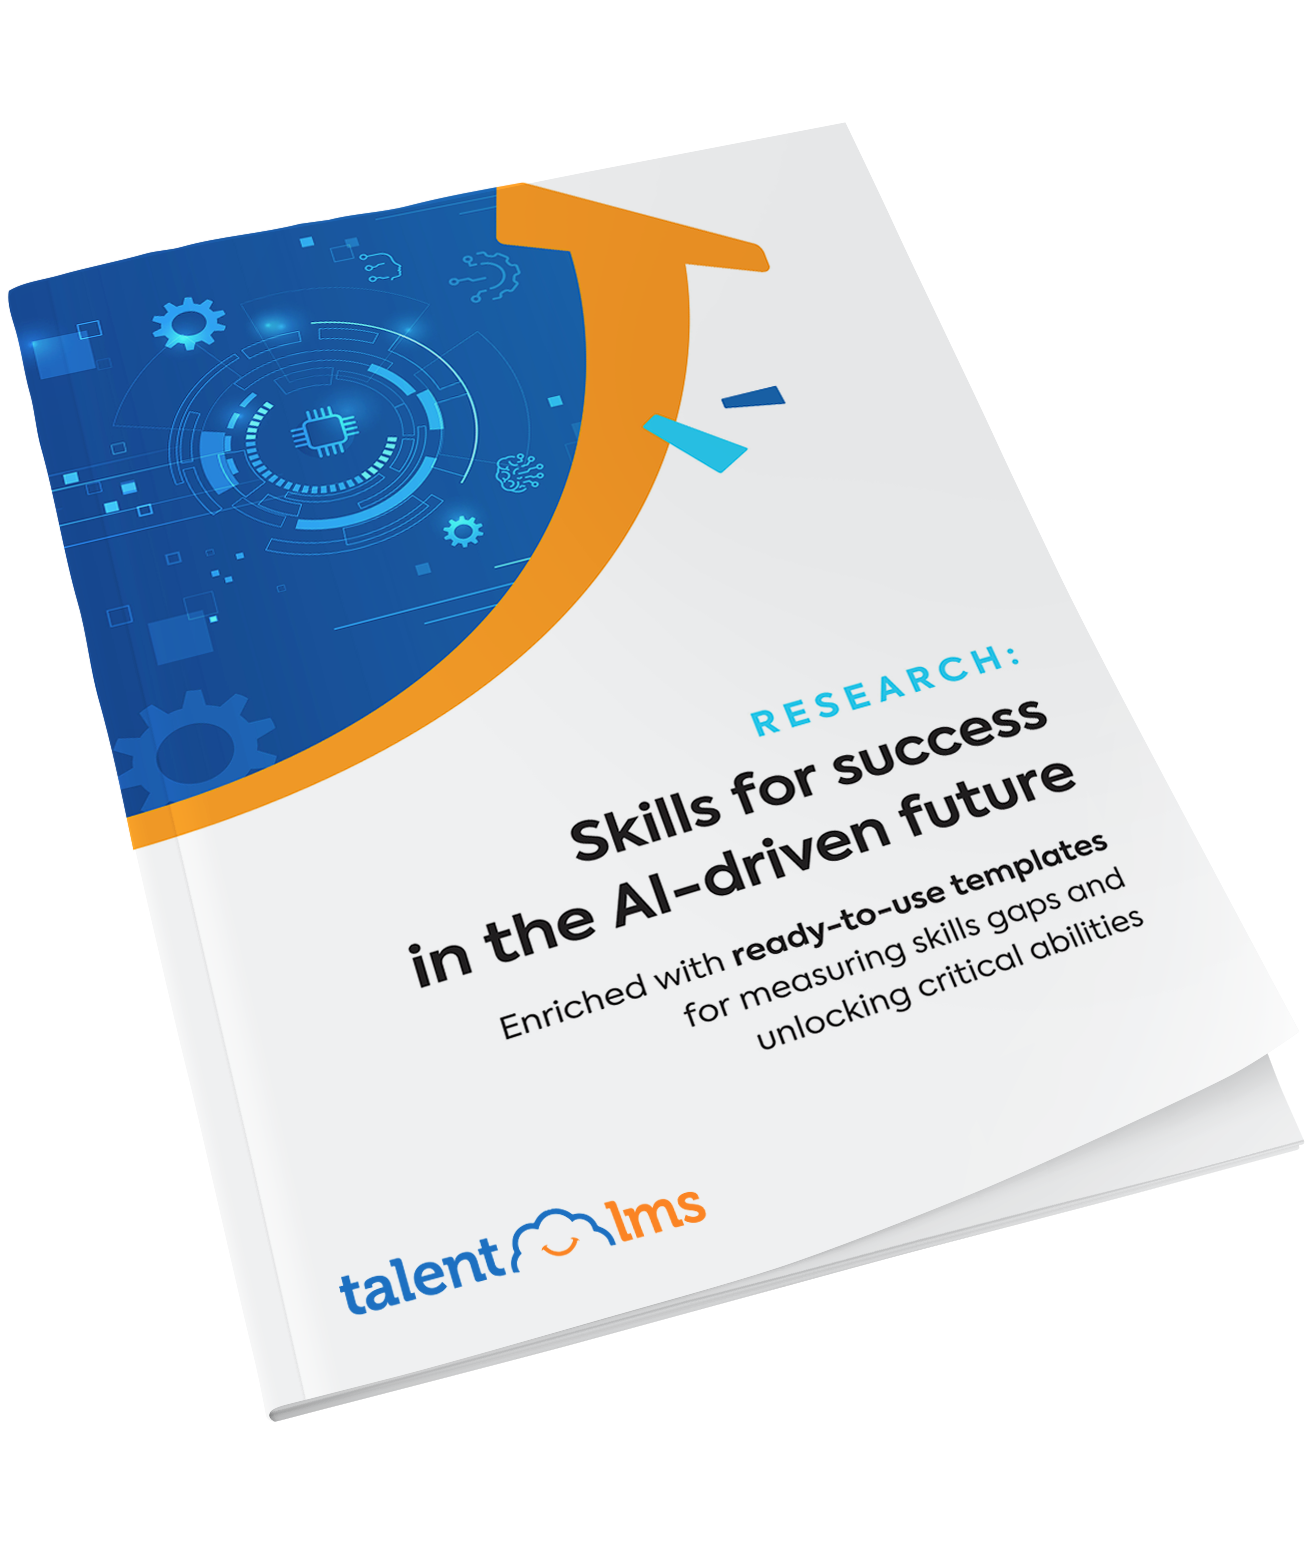 Cover page of the report on skills for success in the AI-driven future